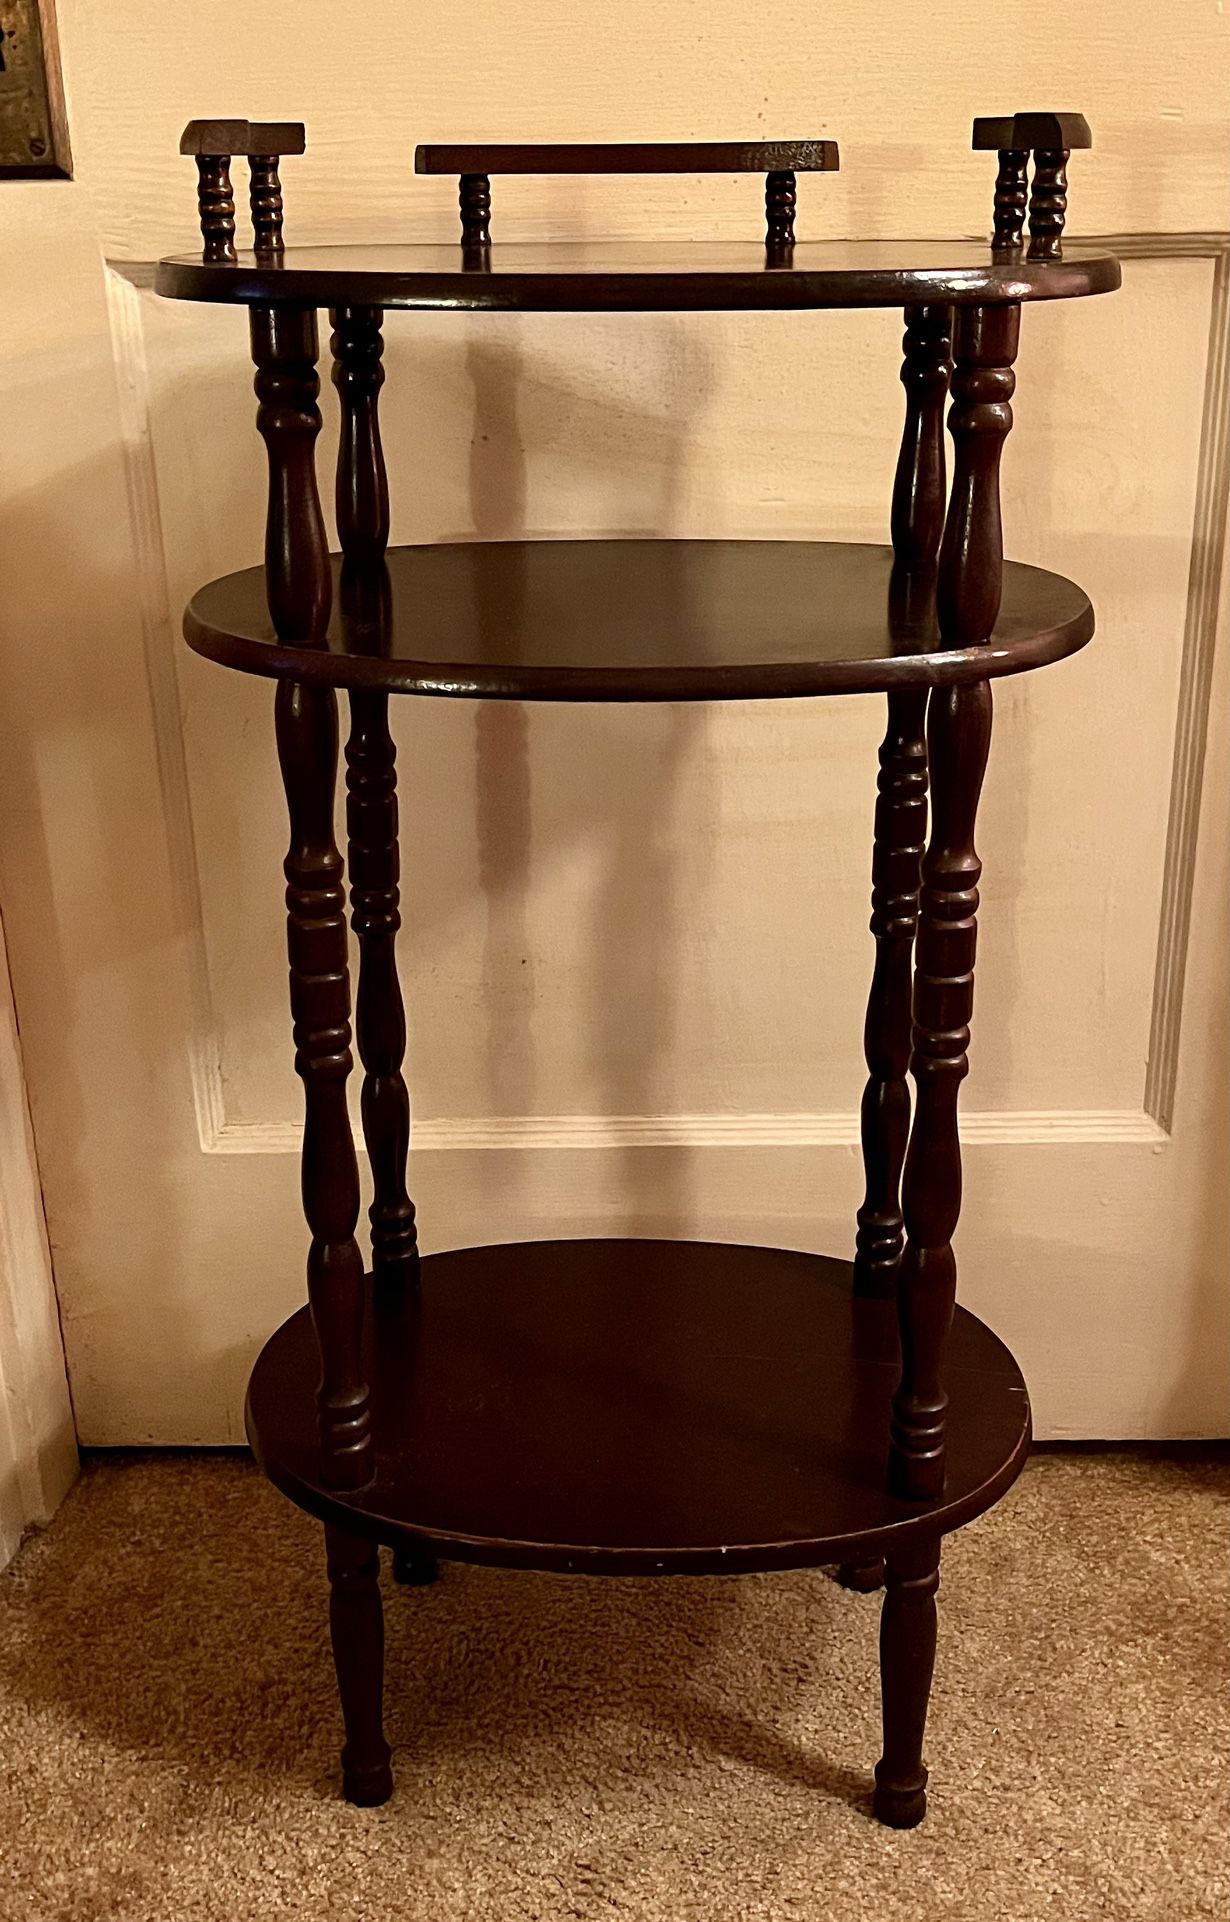 FURNITURE | Small nightstand/table